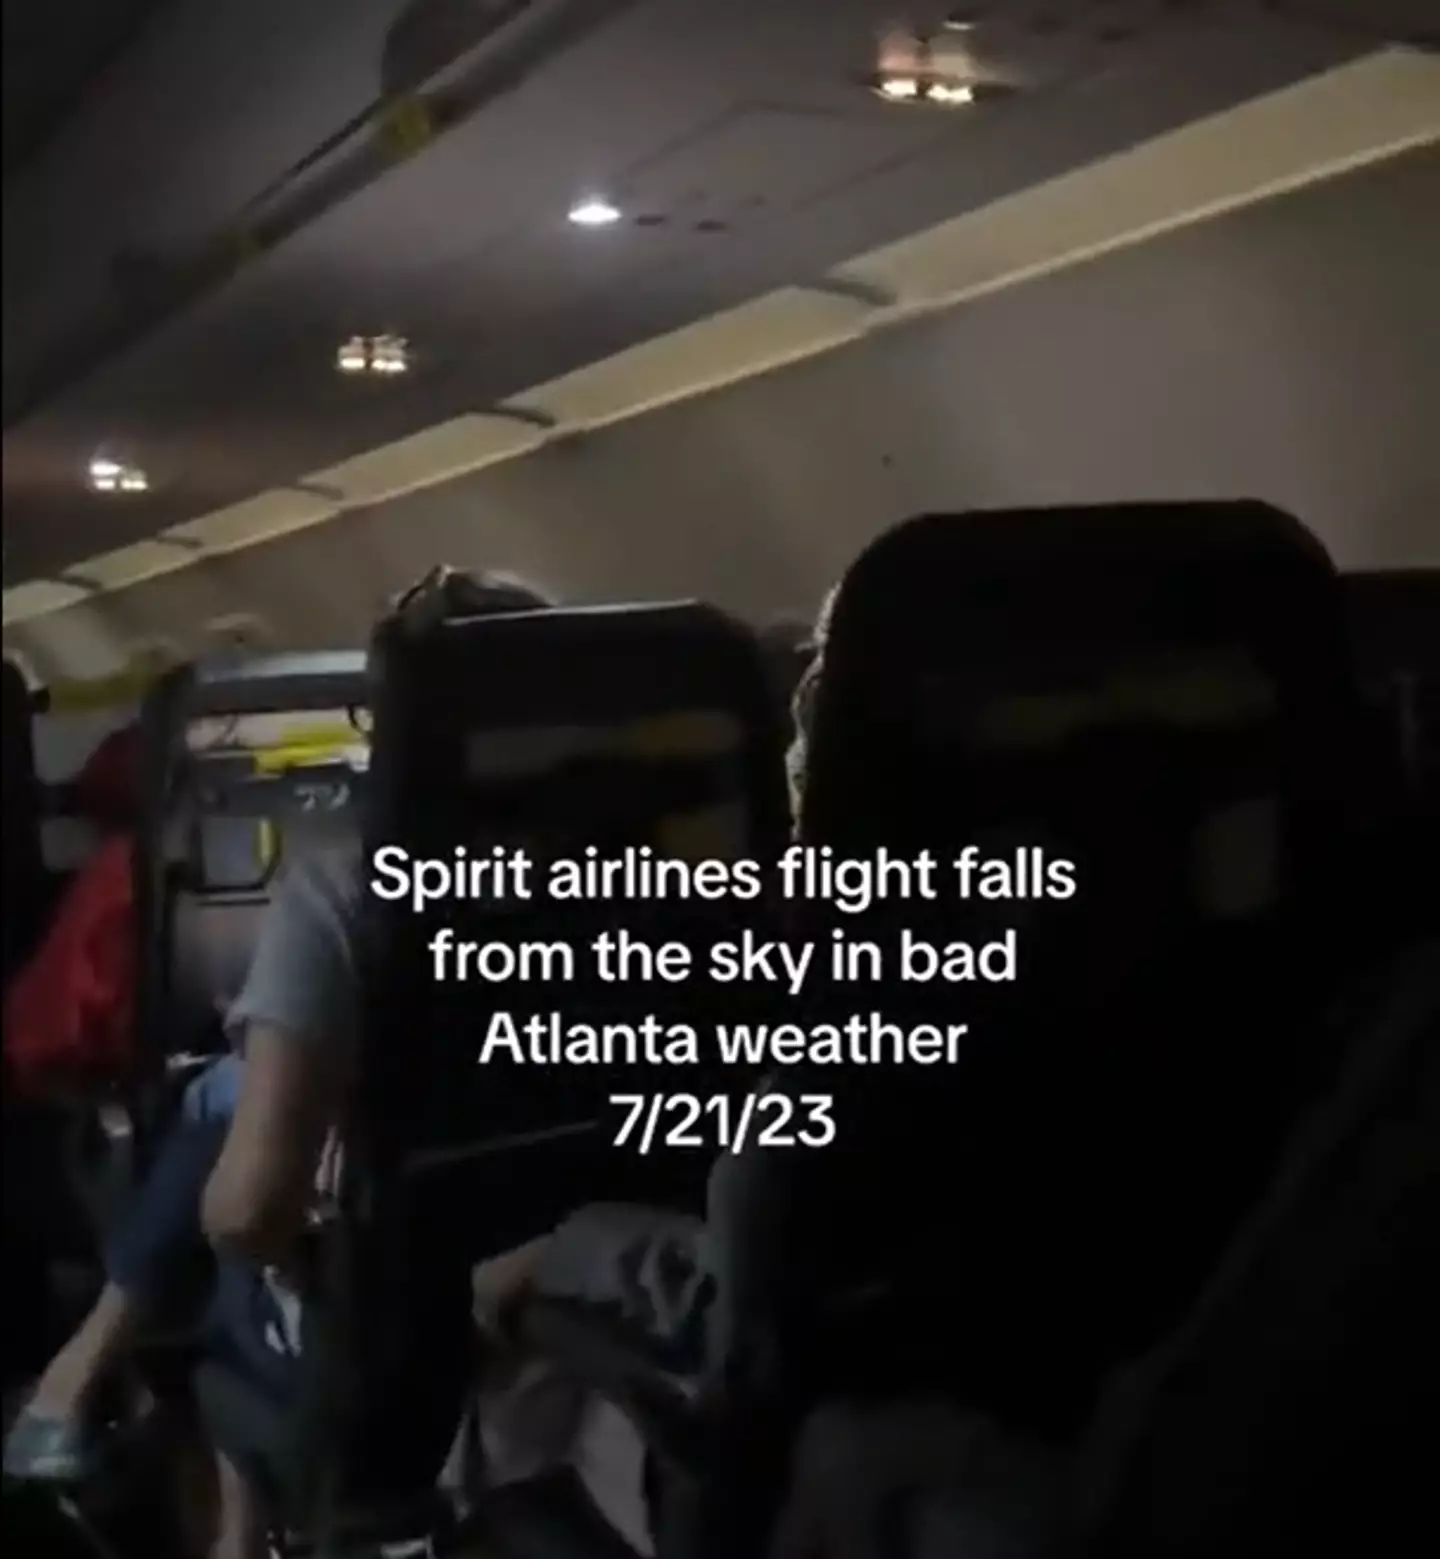 The passengers could feel the plane drop in turbulence.